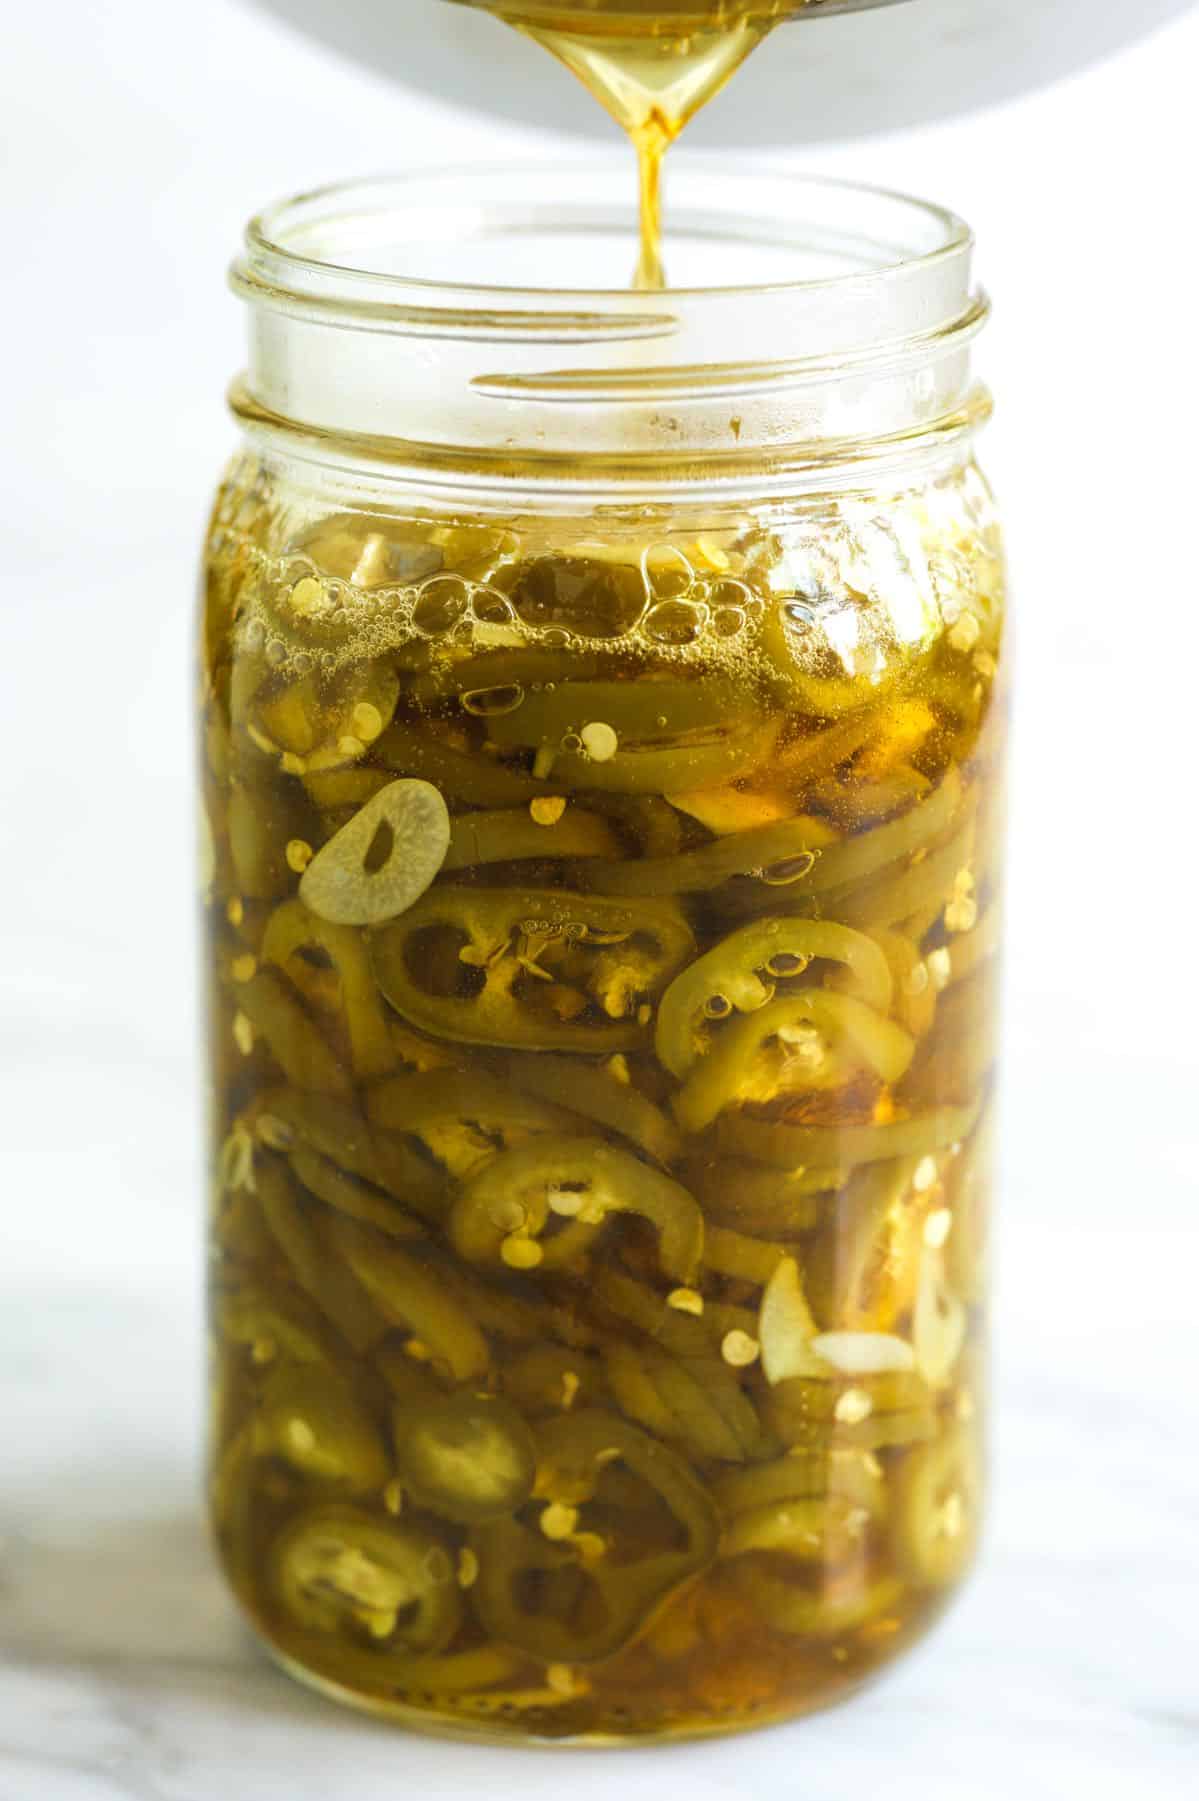 Making candied jalapeños - Pouring a sugar syrup into a jar with jalapeños and garlic.